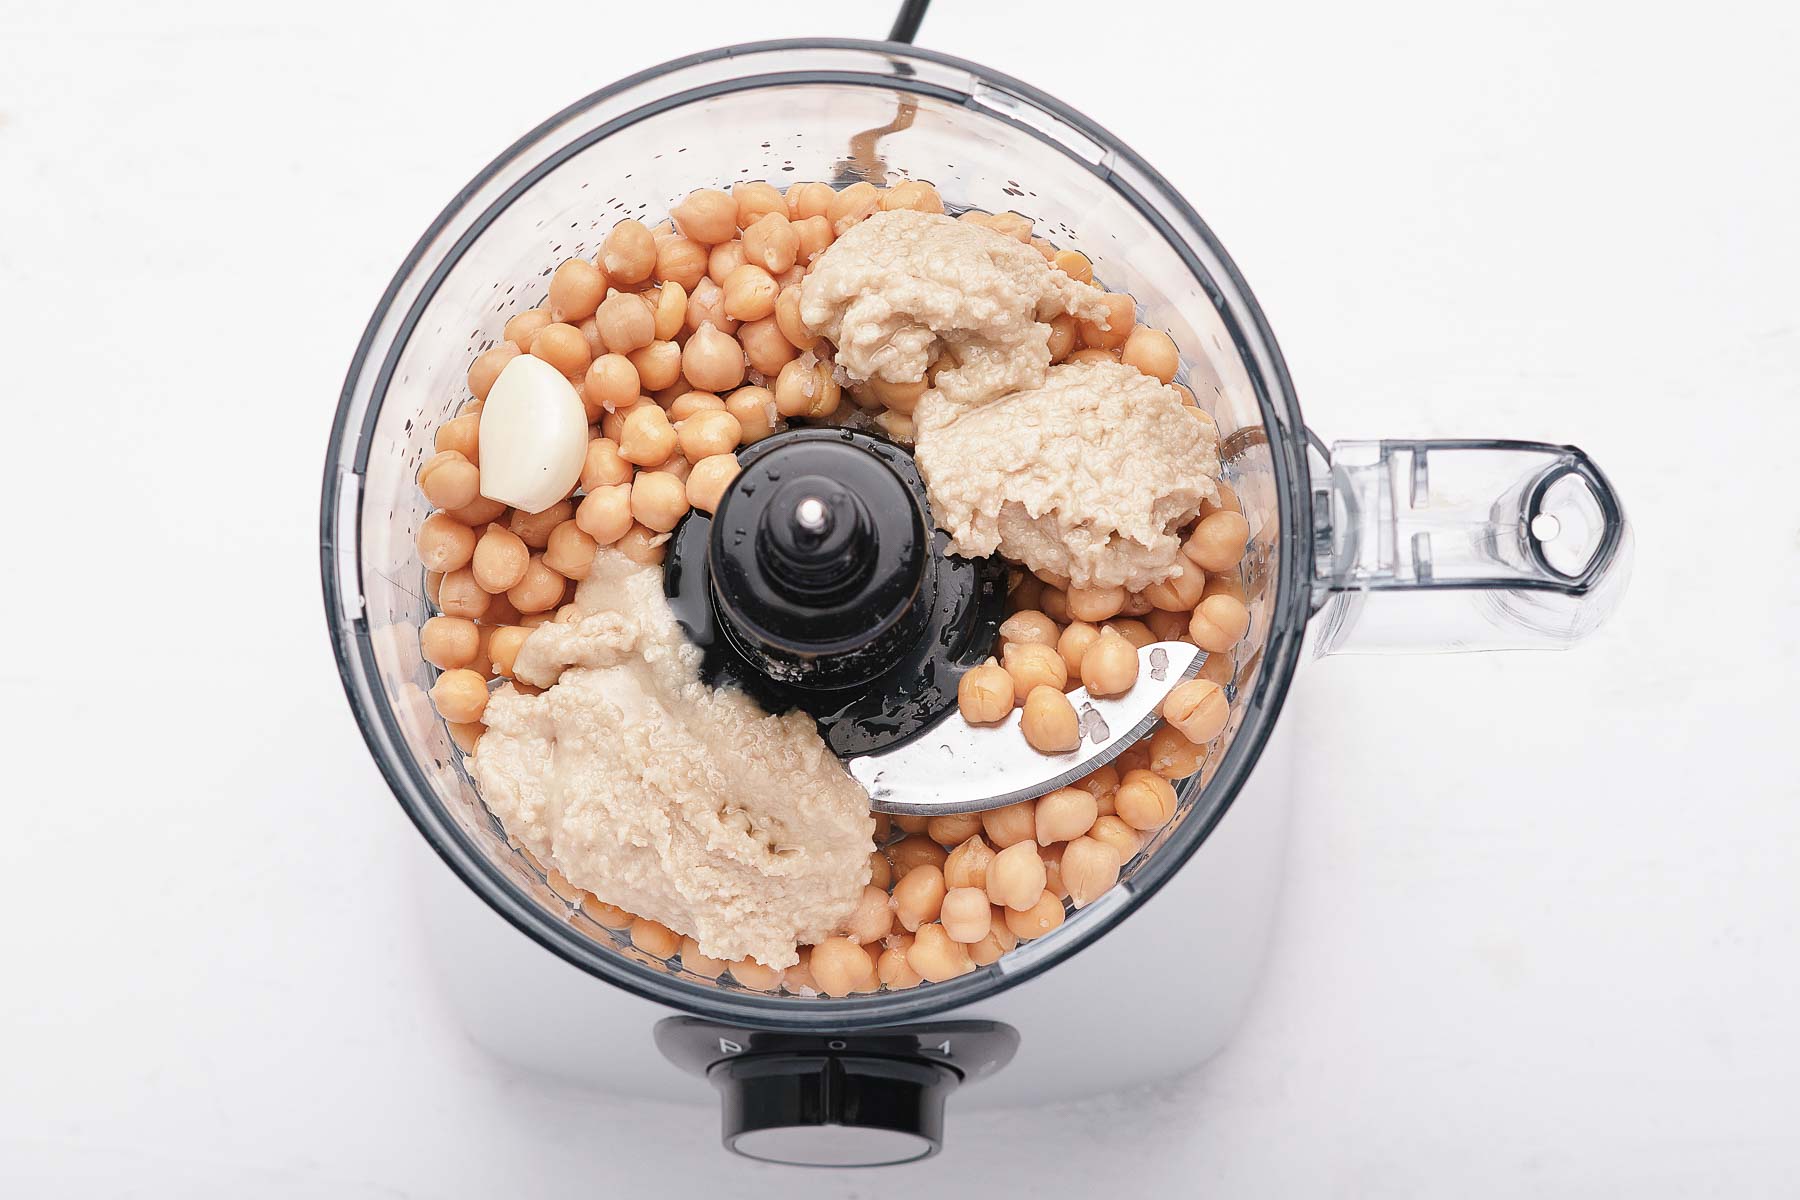 Ingredients for hummus in a food processor bowl.